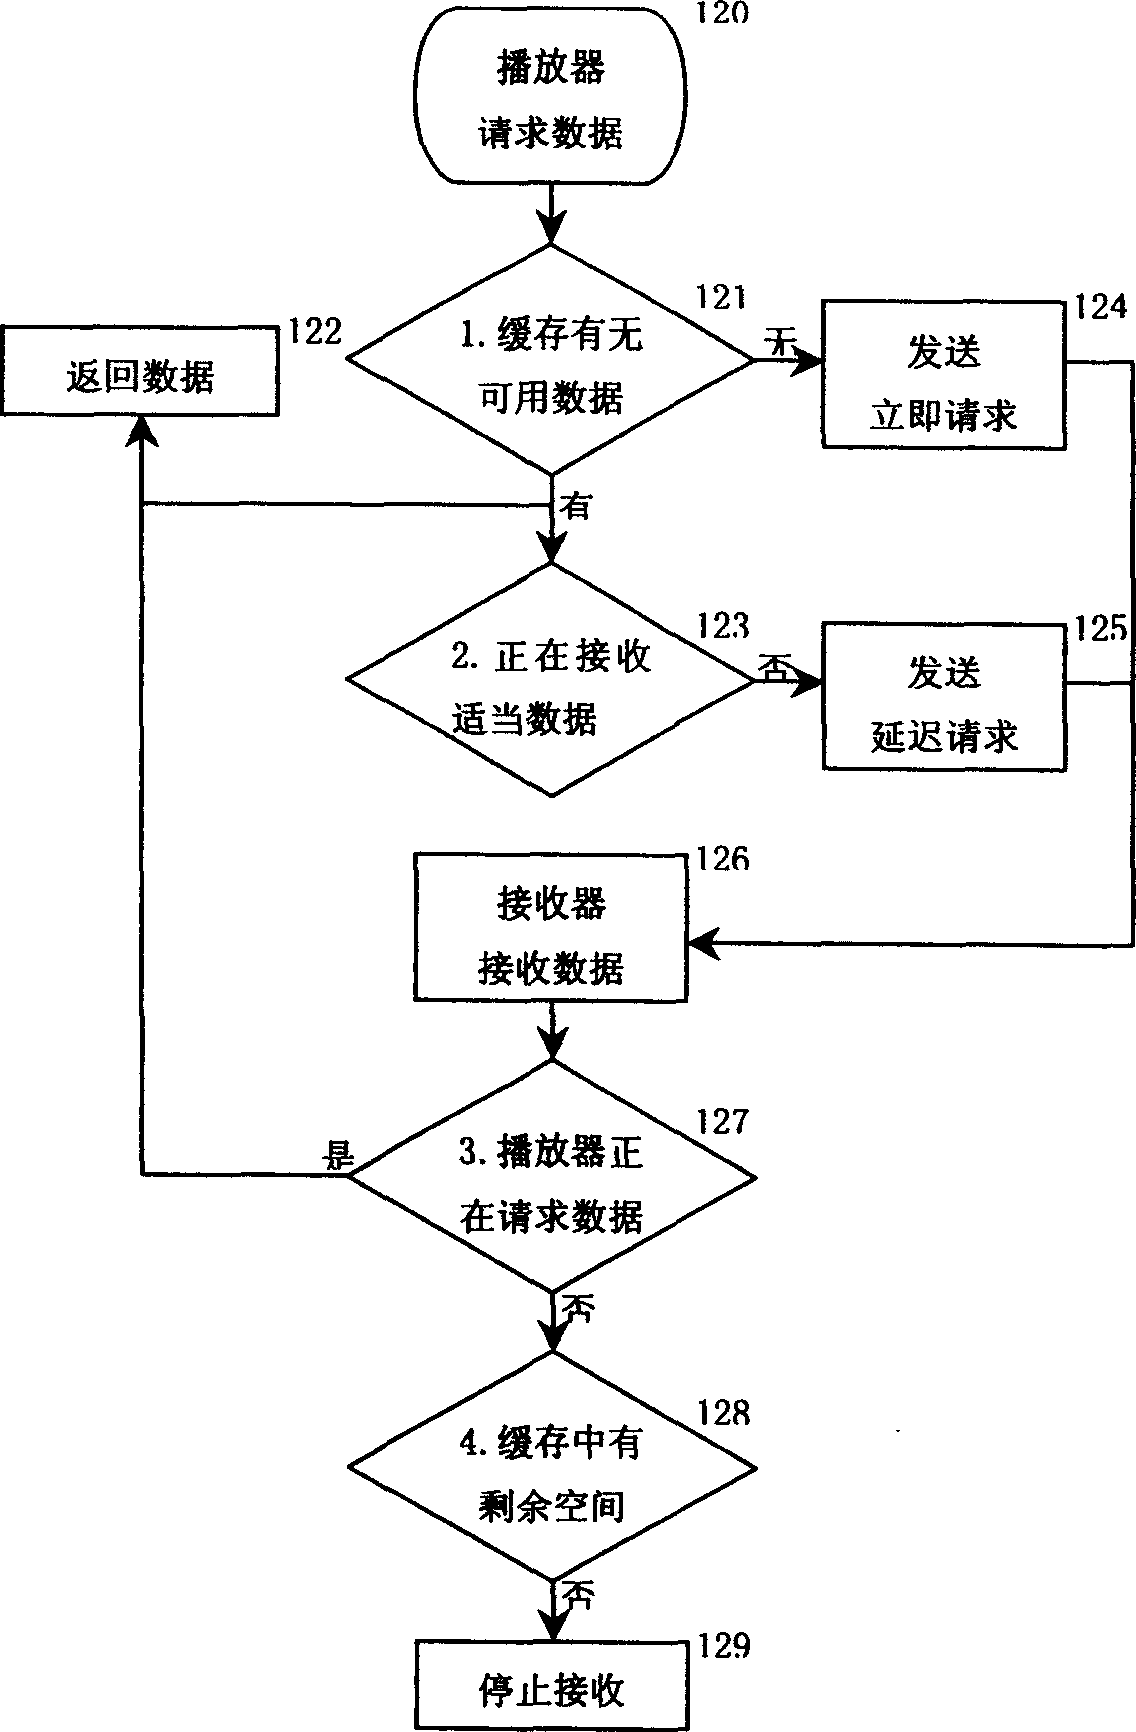 Multi-broadcasting stream merging method of supporting VCR function